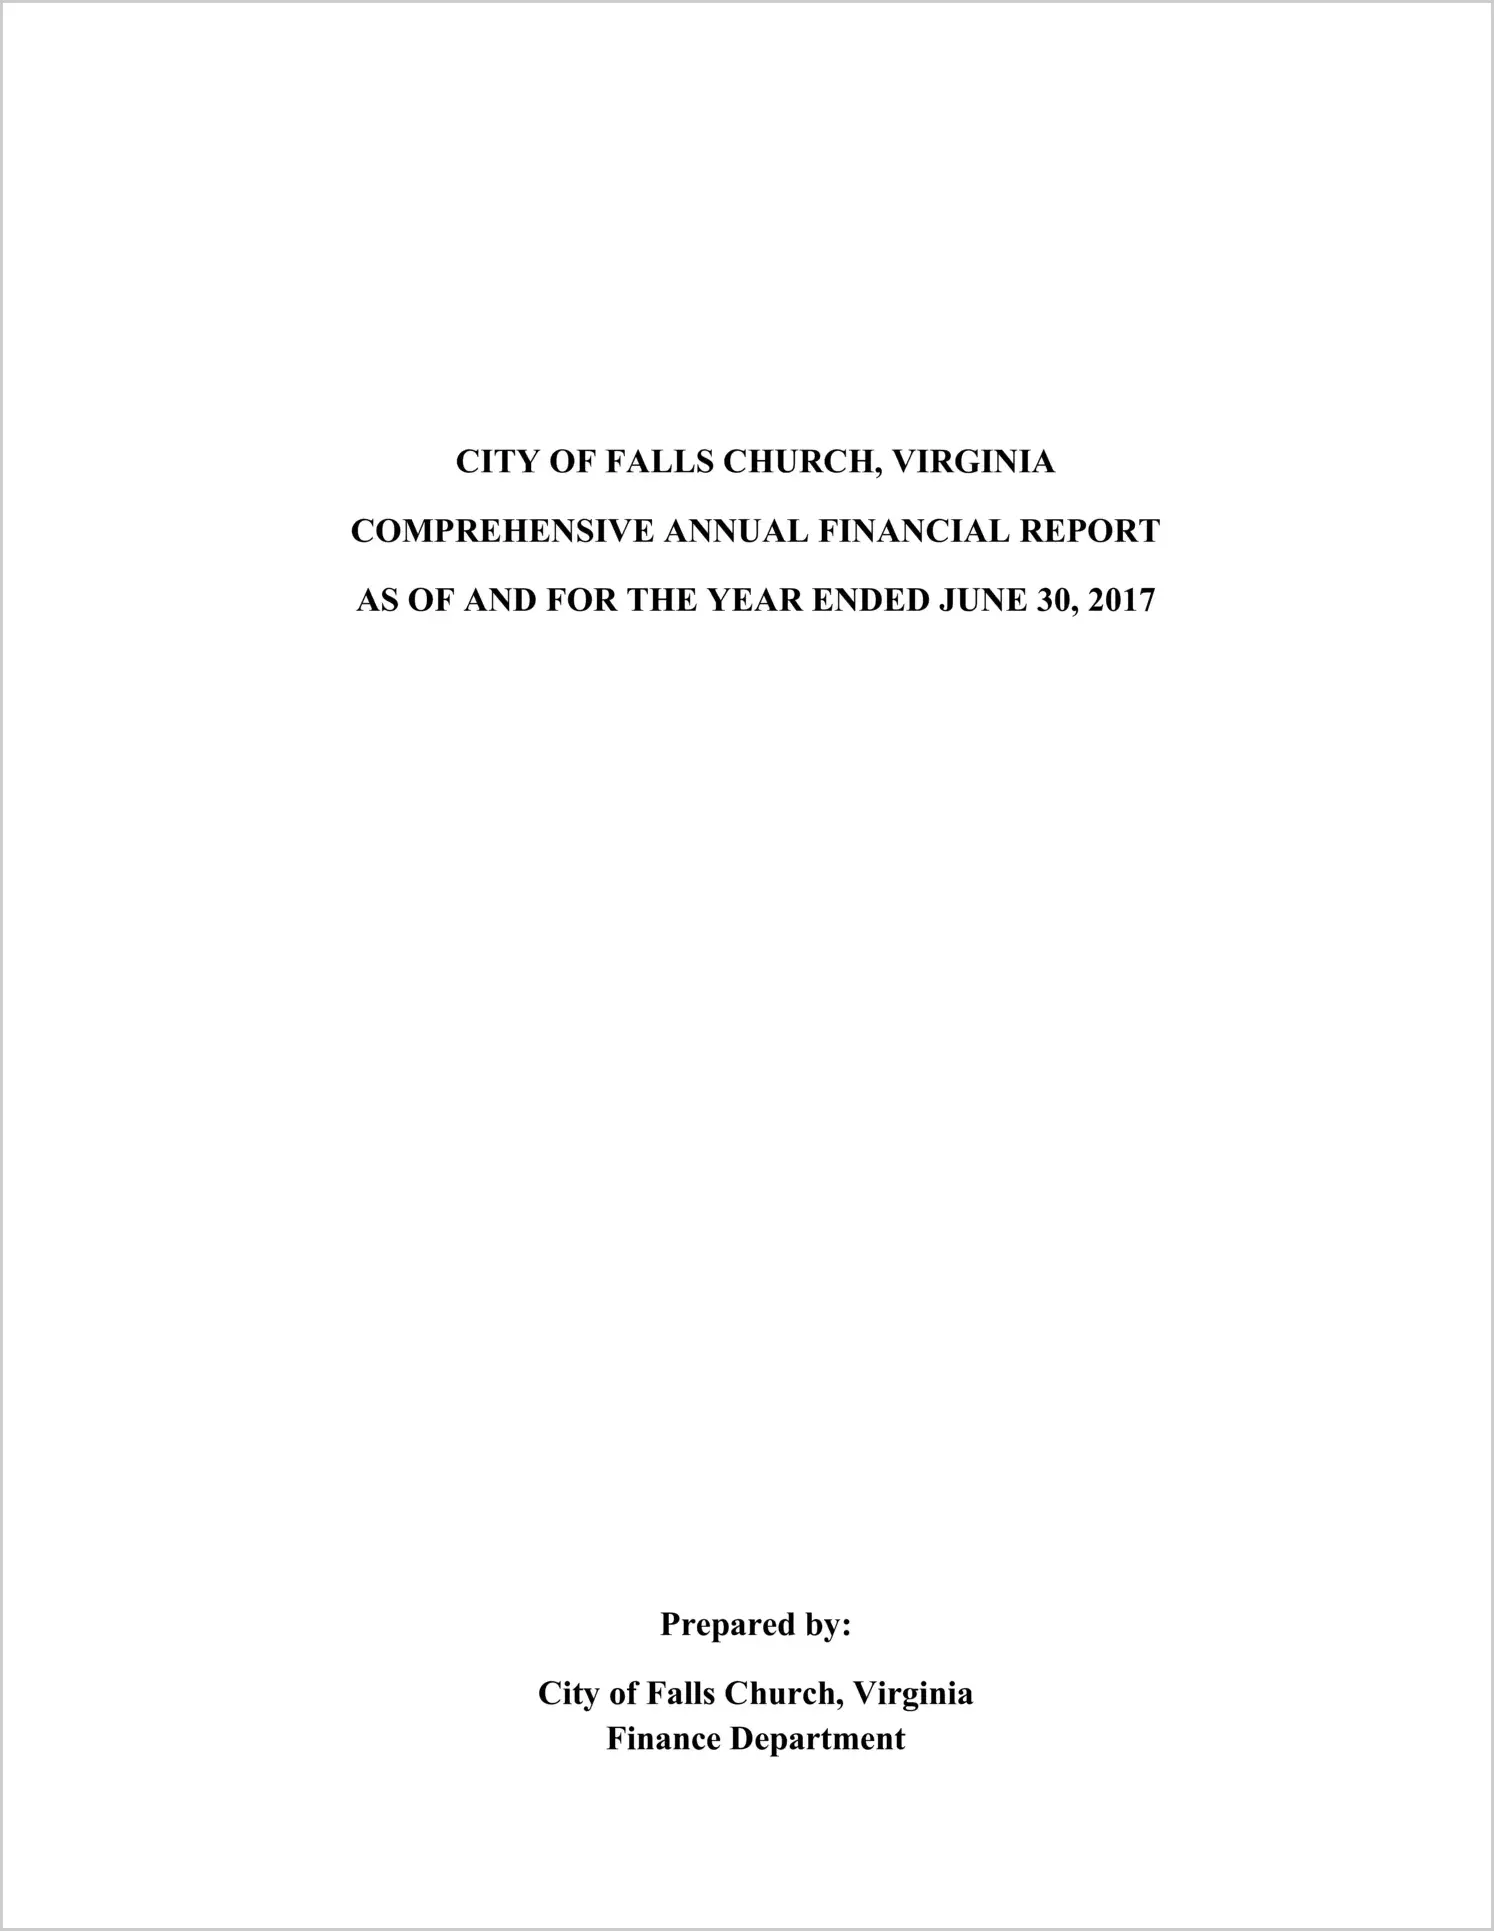 2017 Annual Financial Report for City of Falls Church